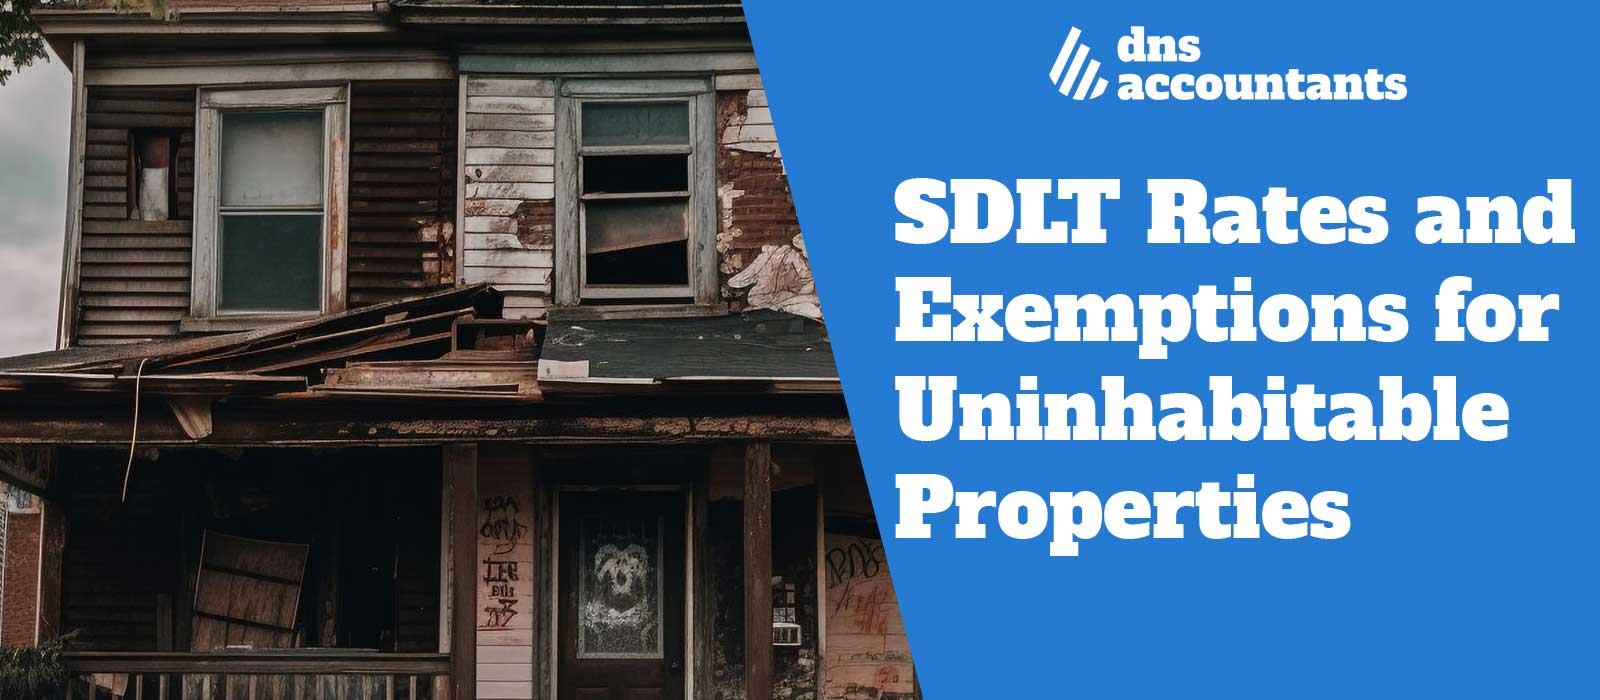 SDLT Rates and Exemptions for Uninhabitable Properties